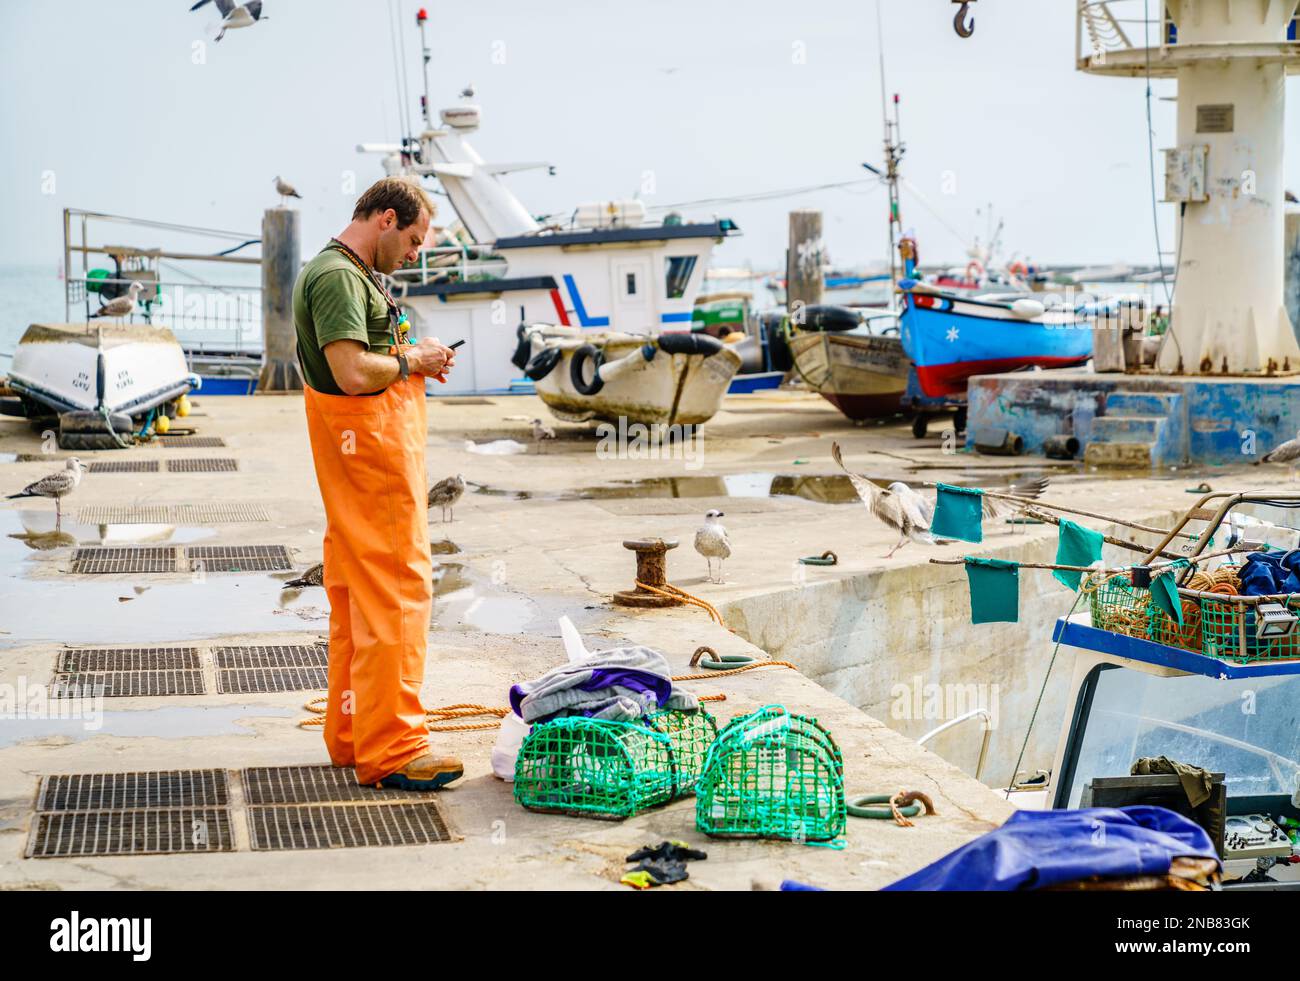 Cascais, Portugal, October 27, 2016: A fisherman is looking at his phone after coming shore in Cascais, Portugal Stock Photo